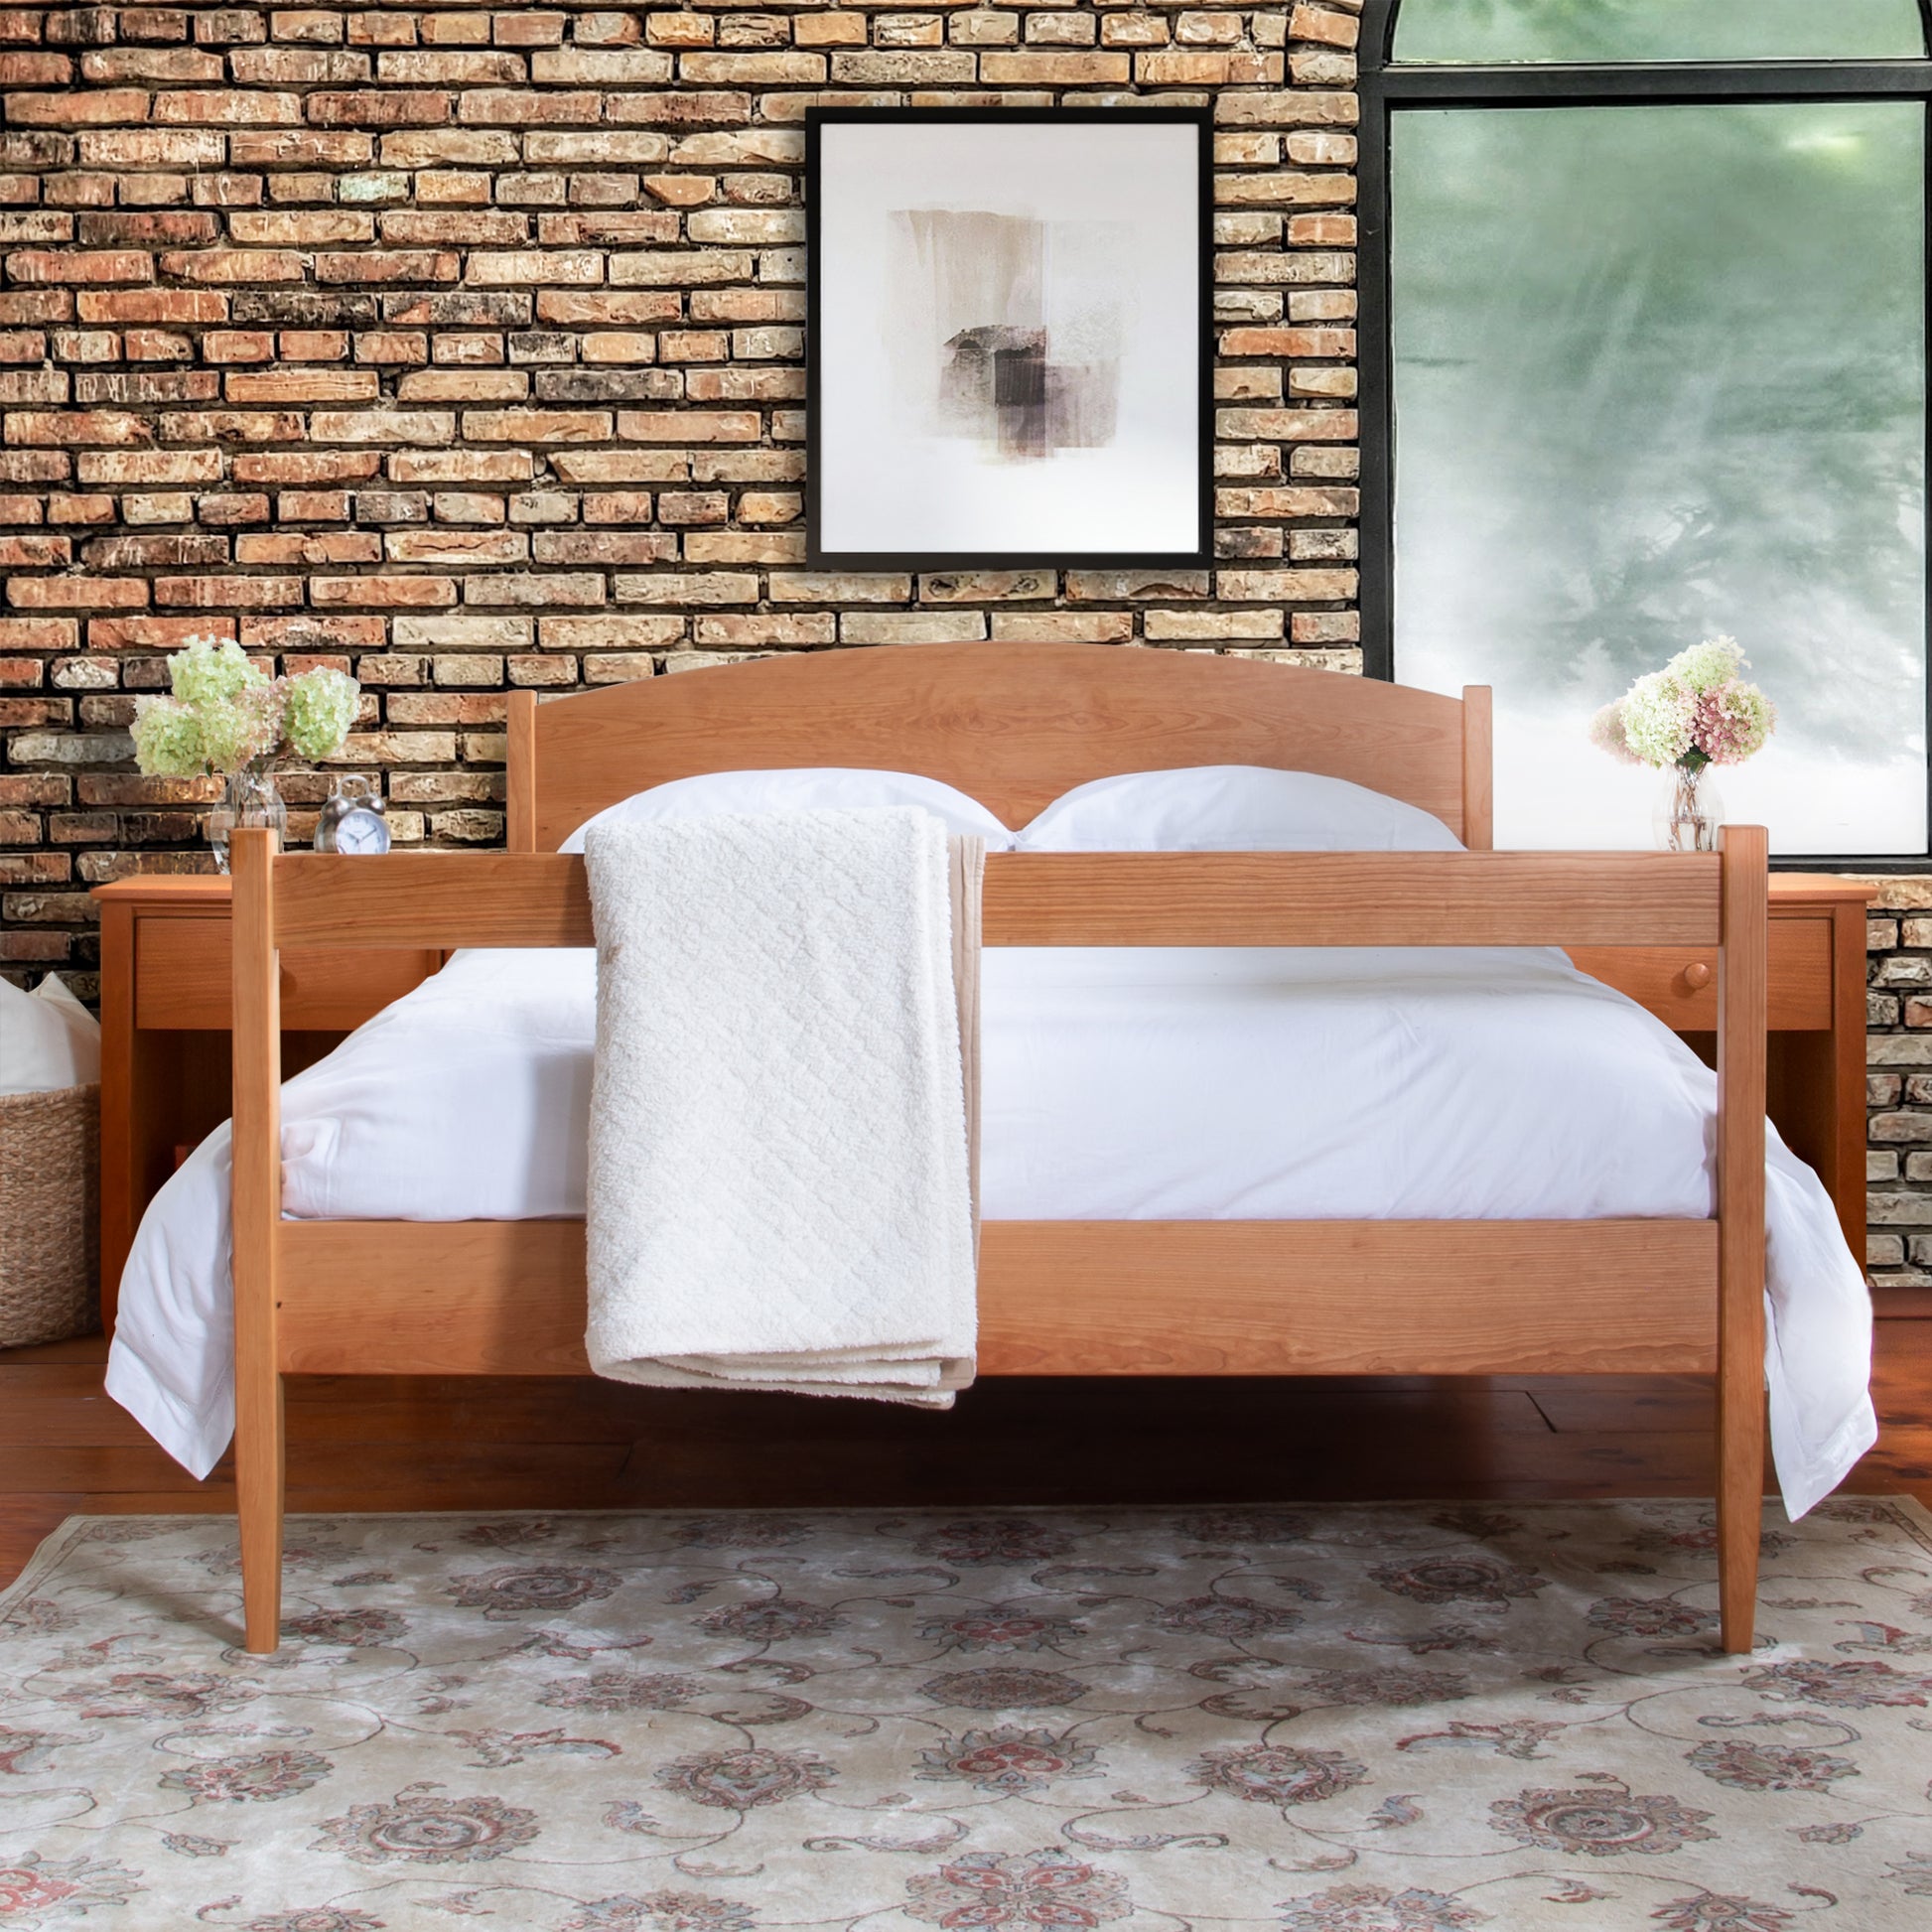 A solid hardwood Maple Corner Woodworks Vermont Shaker Platform Bed handmade by Vermont furniture makers in a bedroom with a brick wall.